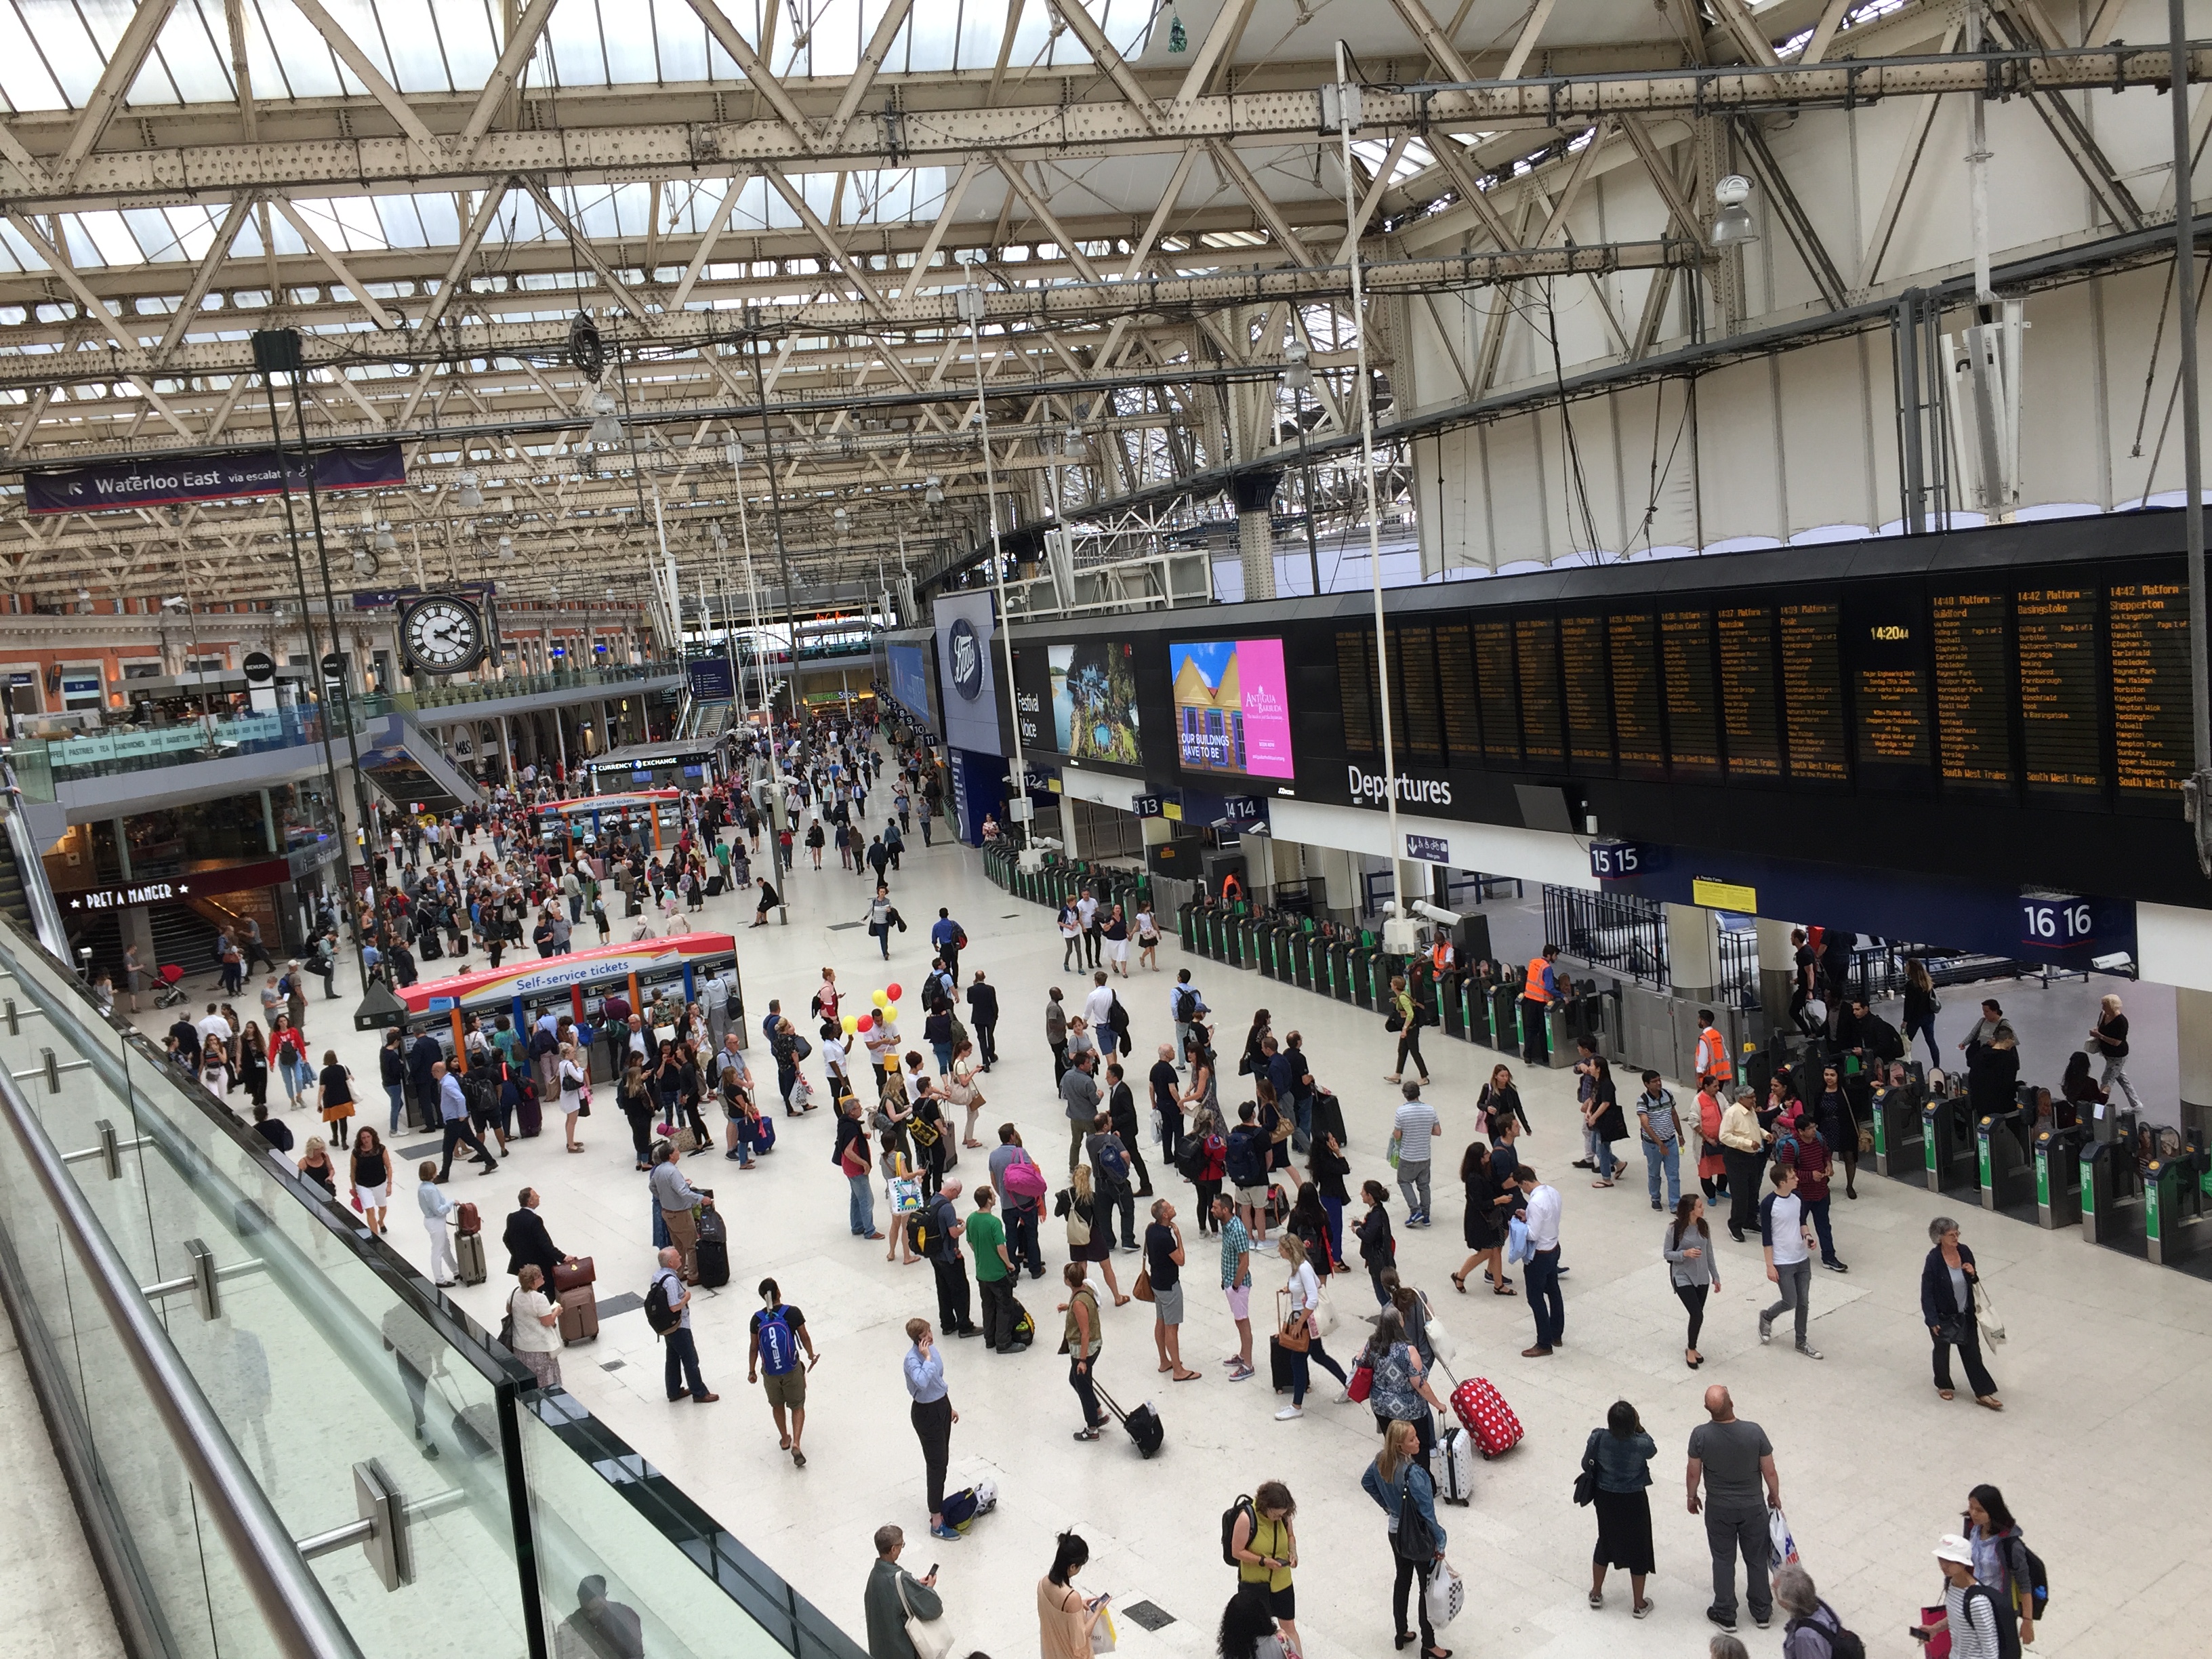 A wide few of the very busy concourse at Waterloo Station, as viewed looked down from the upper level, with ticket machines, ticket barriers, departure boards, advertising screens, and the iconic clock that hangs from the ceiling.